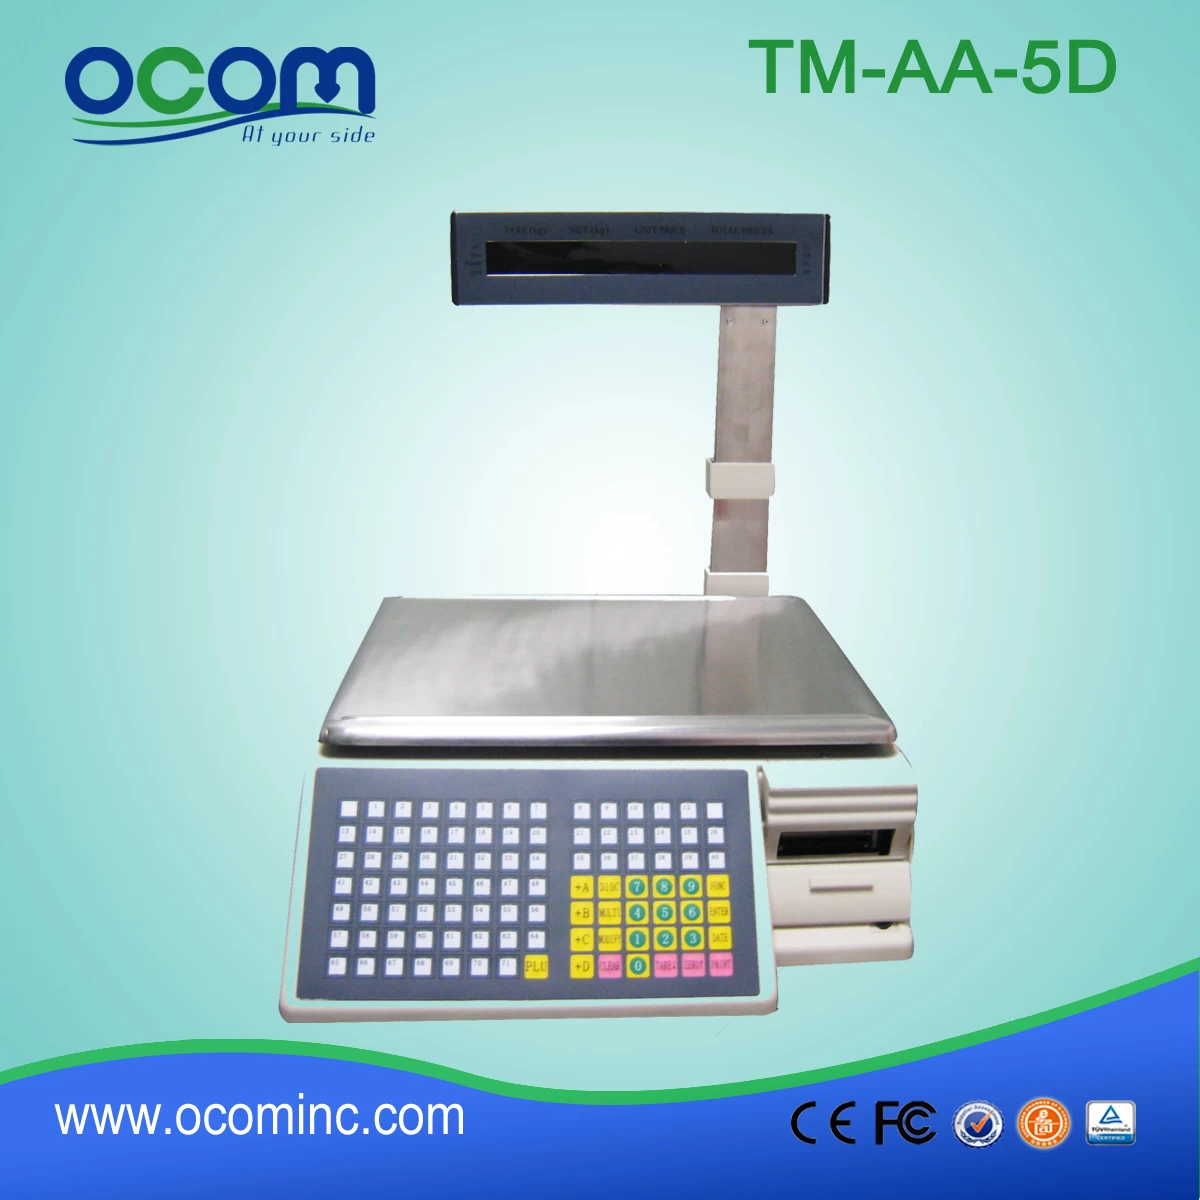 TM-AA-5D Retail weighing Scales Barcode Label Printing Scale Price